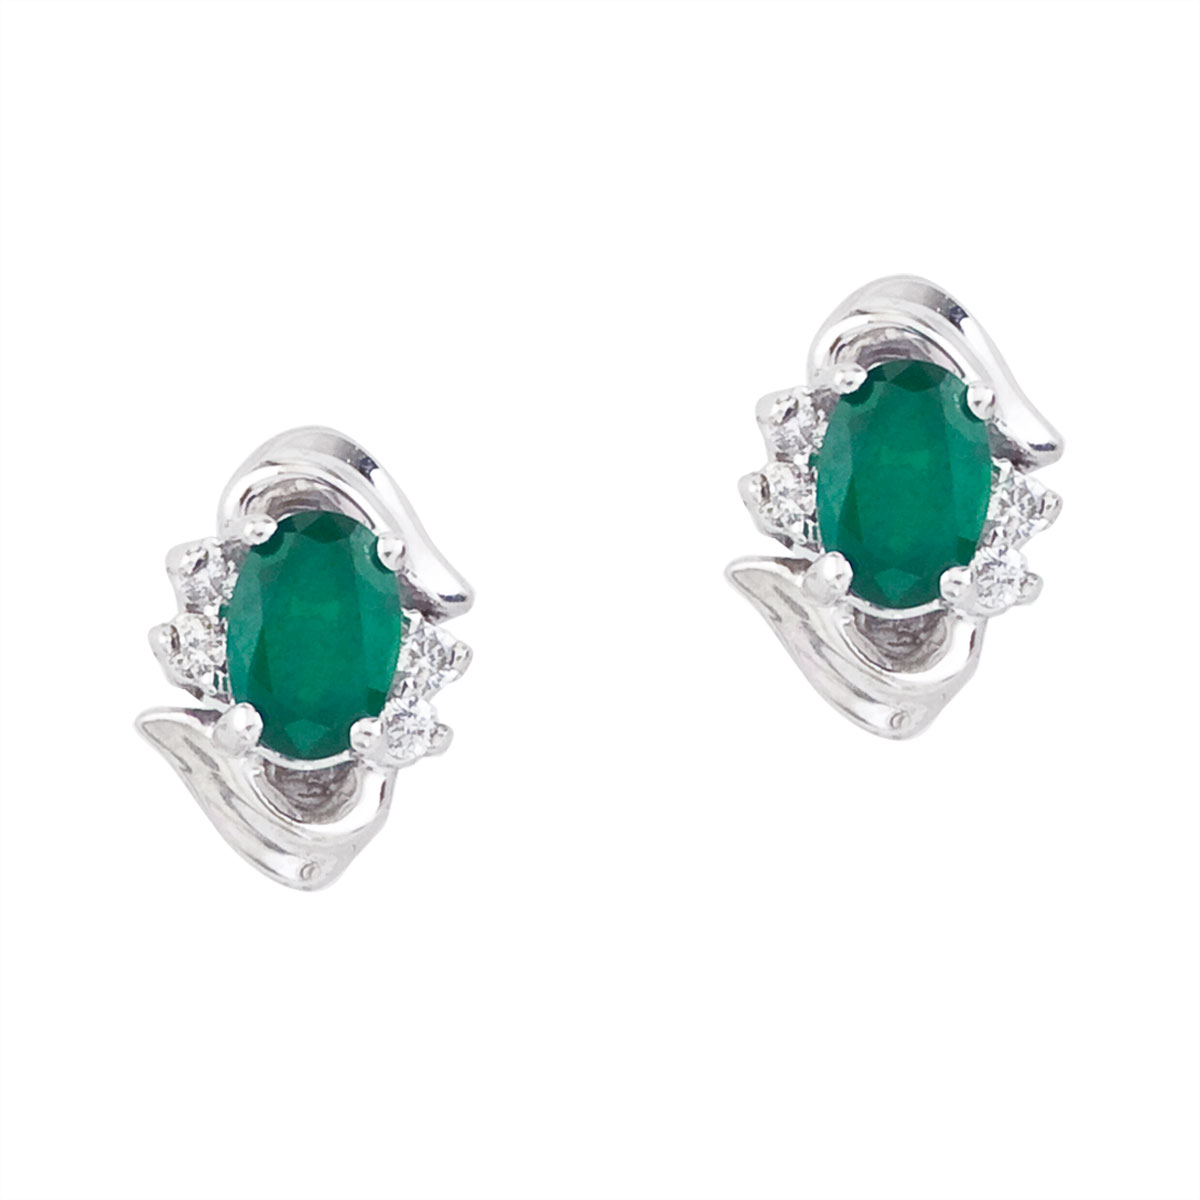 JCX2311: Stunning 14k white gold and emerald earrings. Featuring natural 6x4 mm oval emeralds and .11 total carat diamonds.